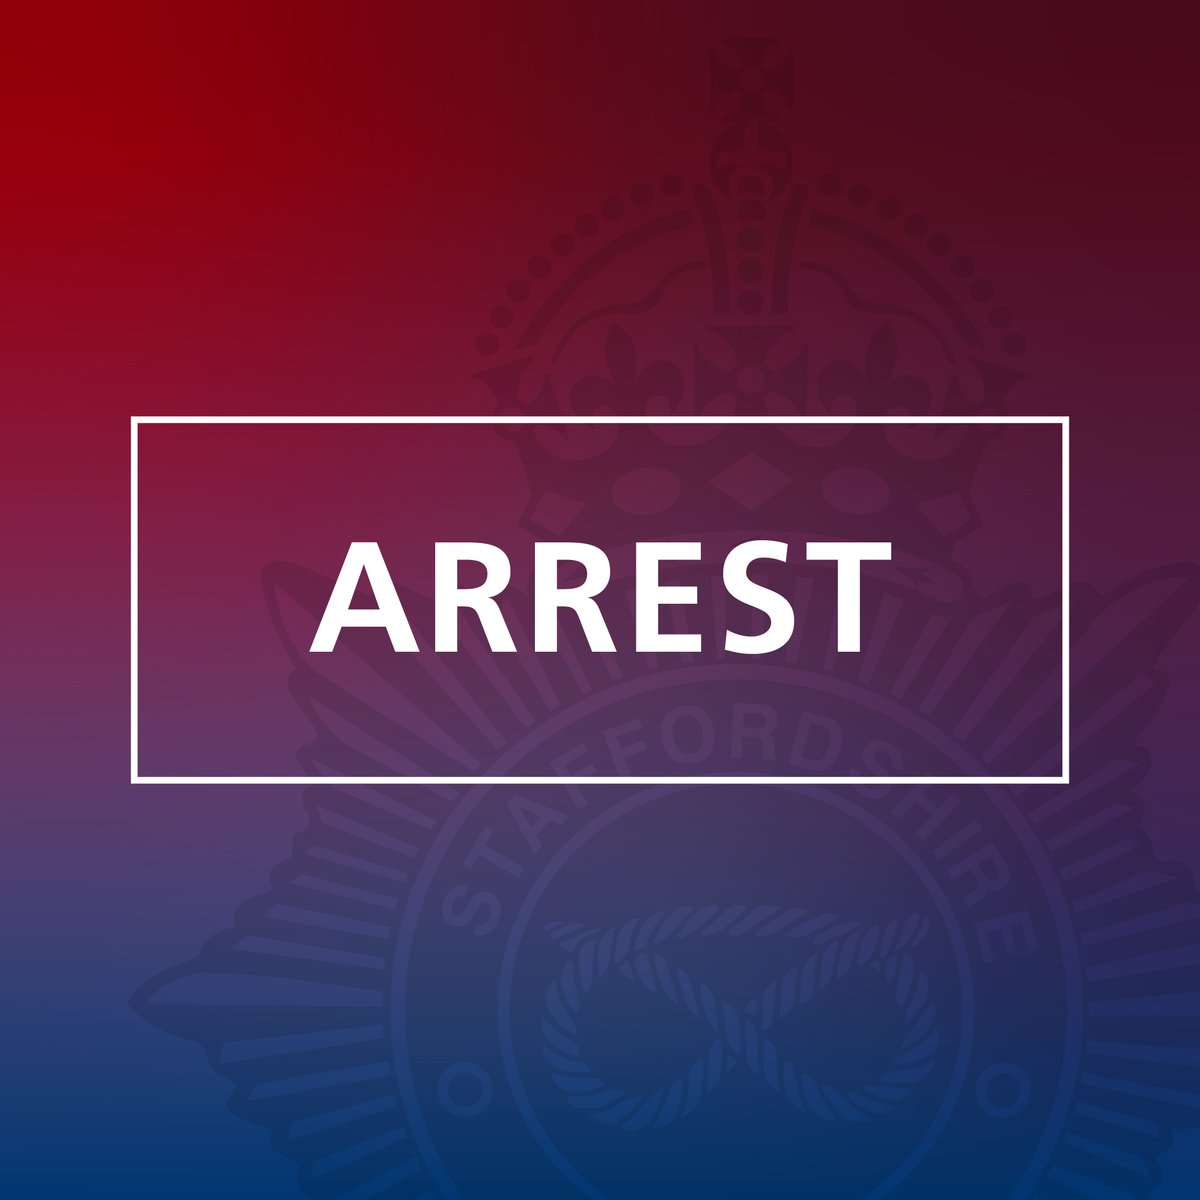 ARREST; This afternoon, a male that was wanted for Recall to Prison has been located and arrested in Rugeley. He is now en-route to His Majesty's Prison. #Arrest #RecallToPrison #Rugeley #Police